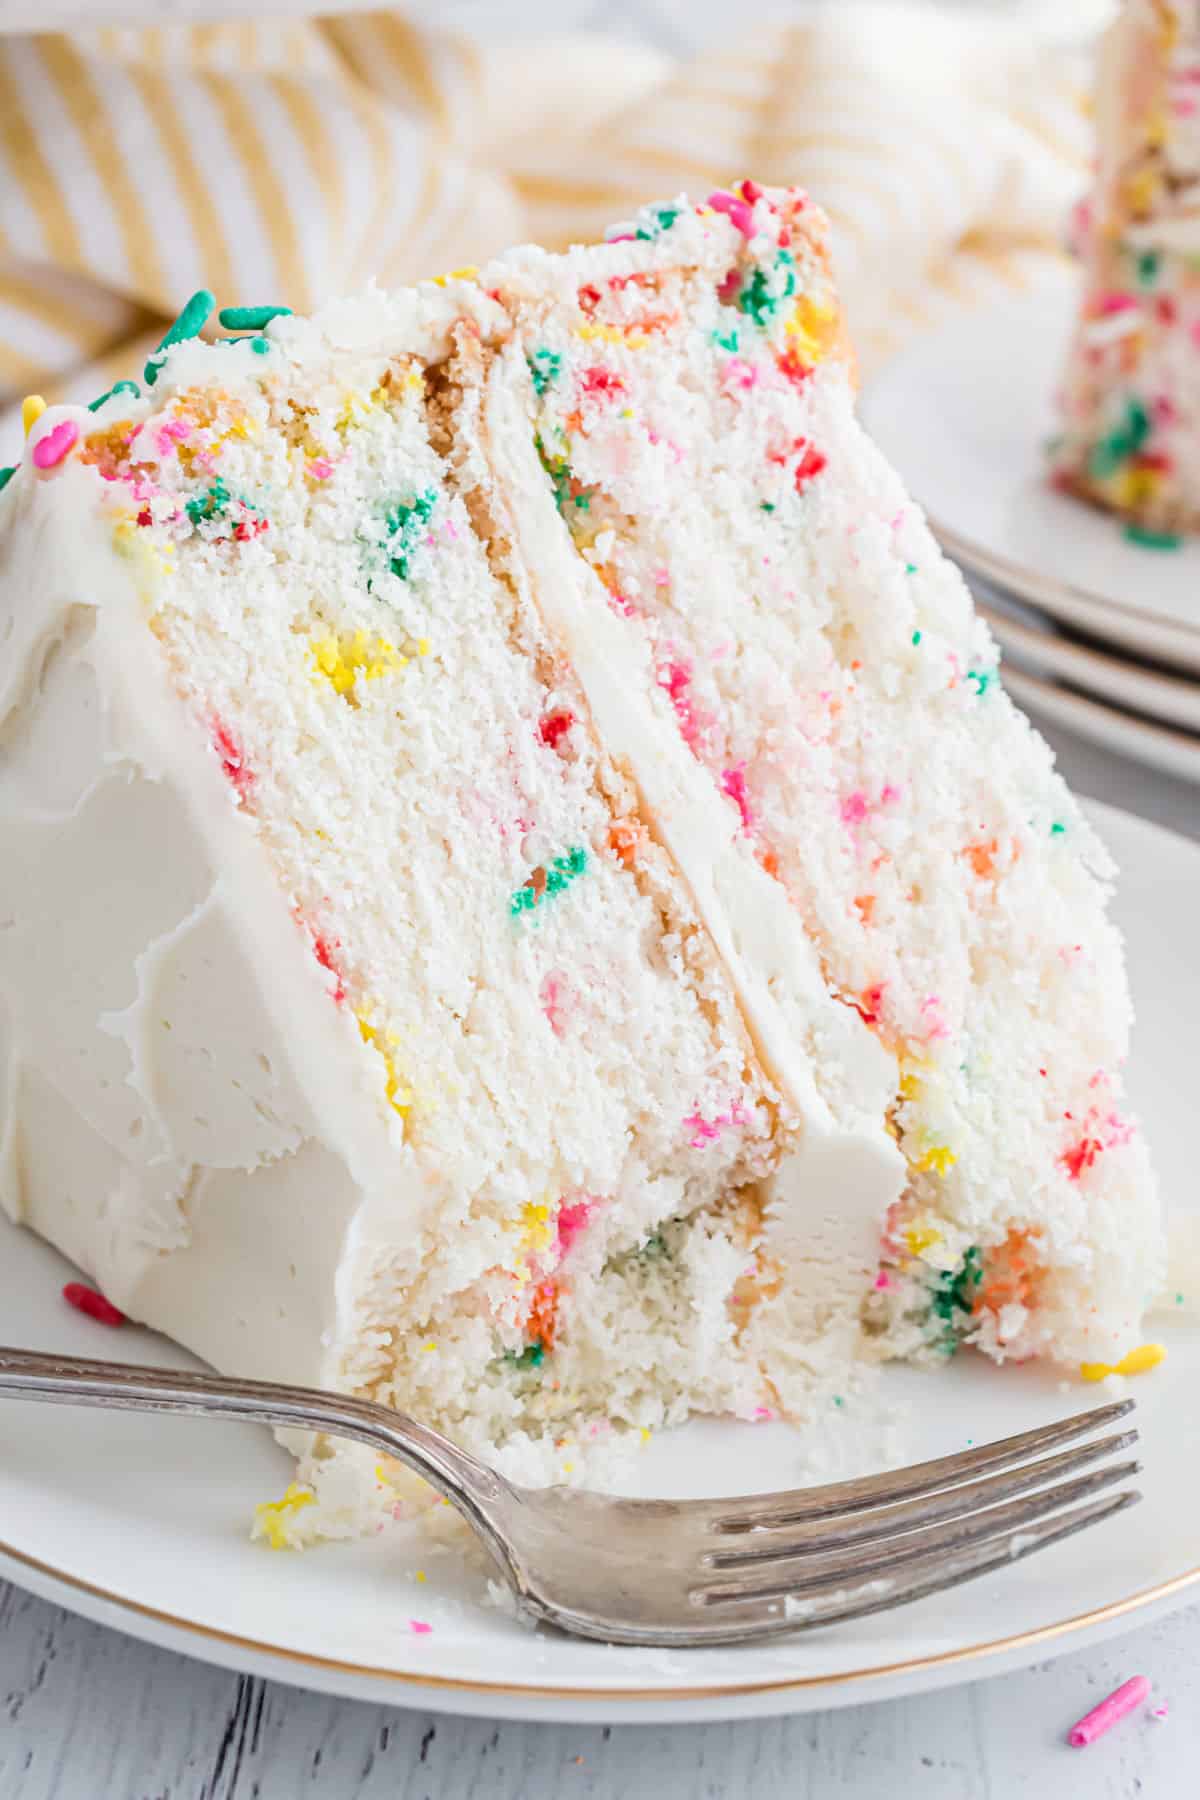 Slice of funfetti layer cake with vanilla frosting on white plate.